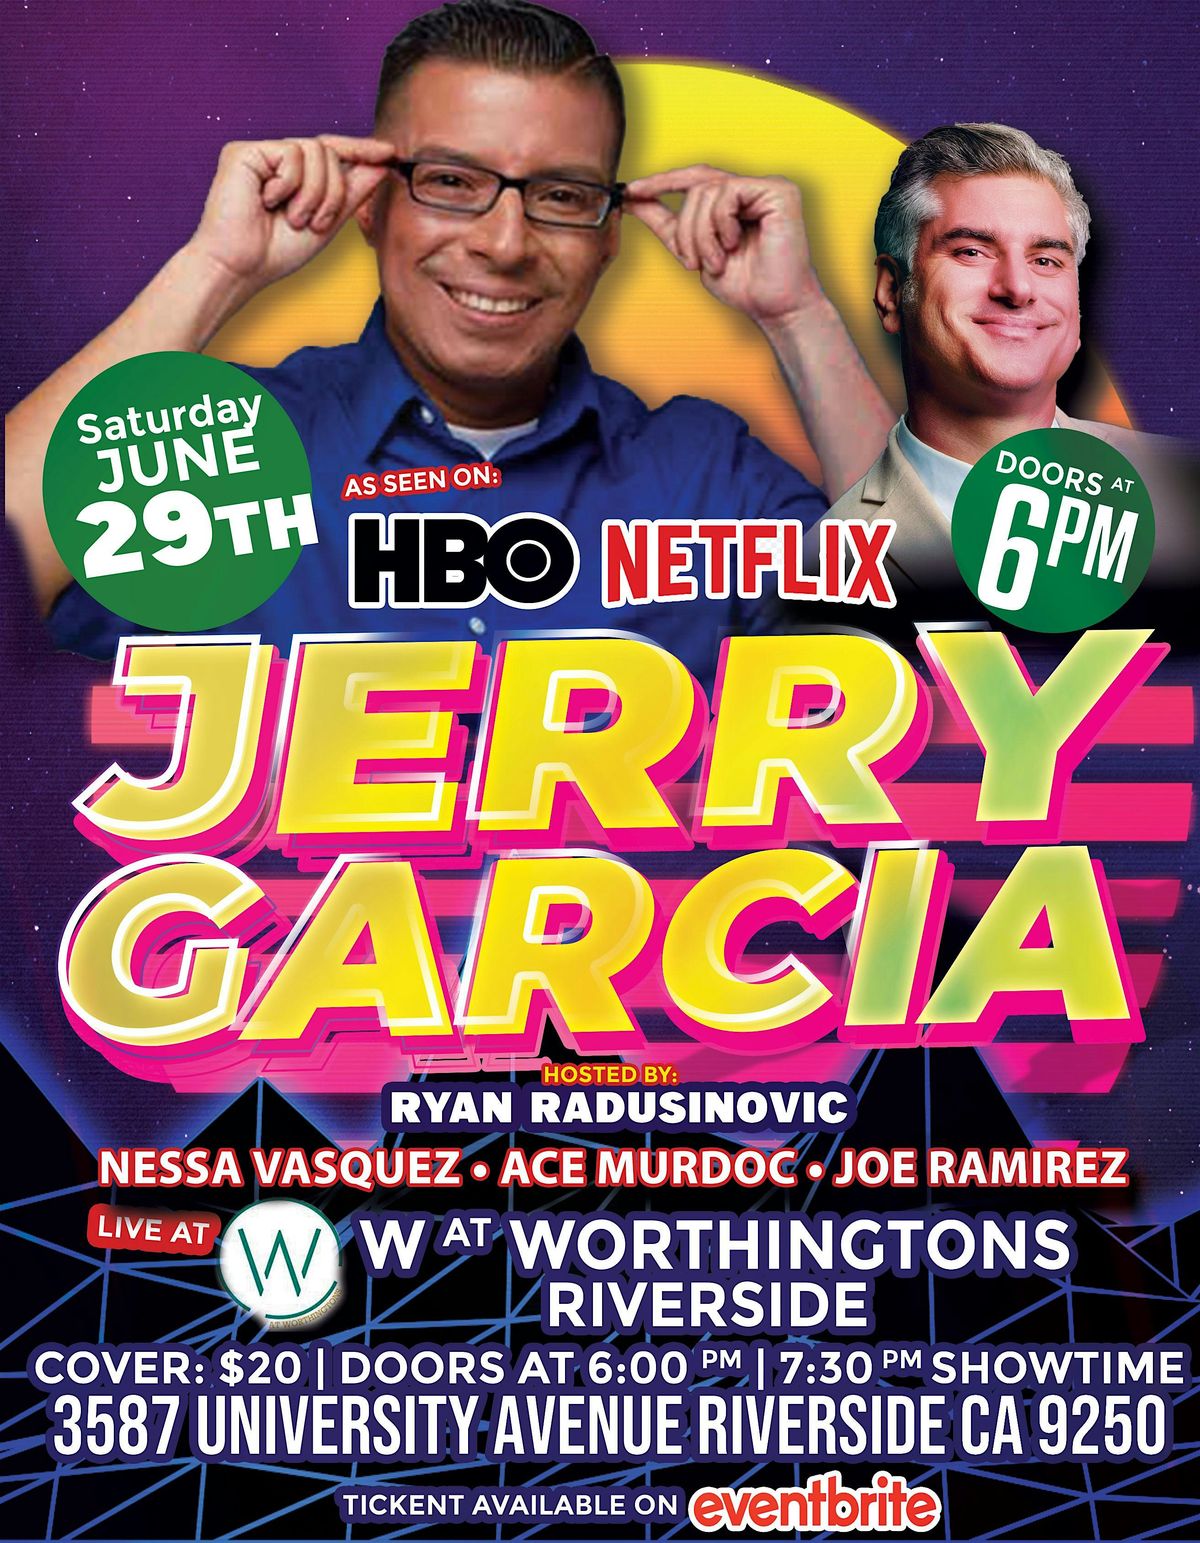 Jerry Garcia Live at the W at Worthington's Downtown Riverside